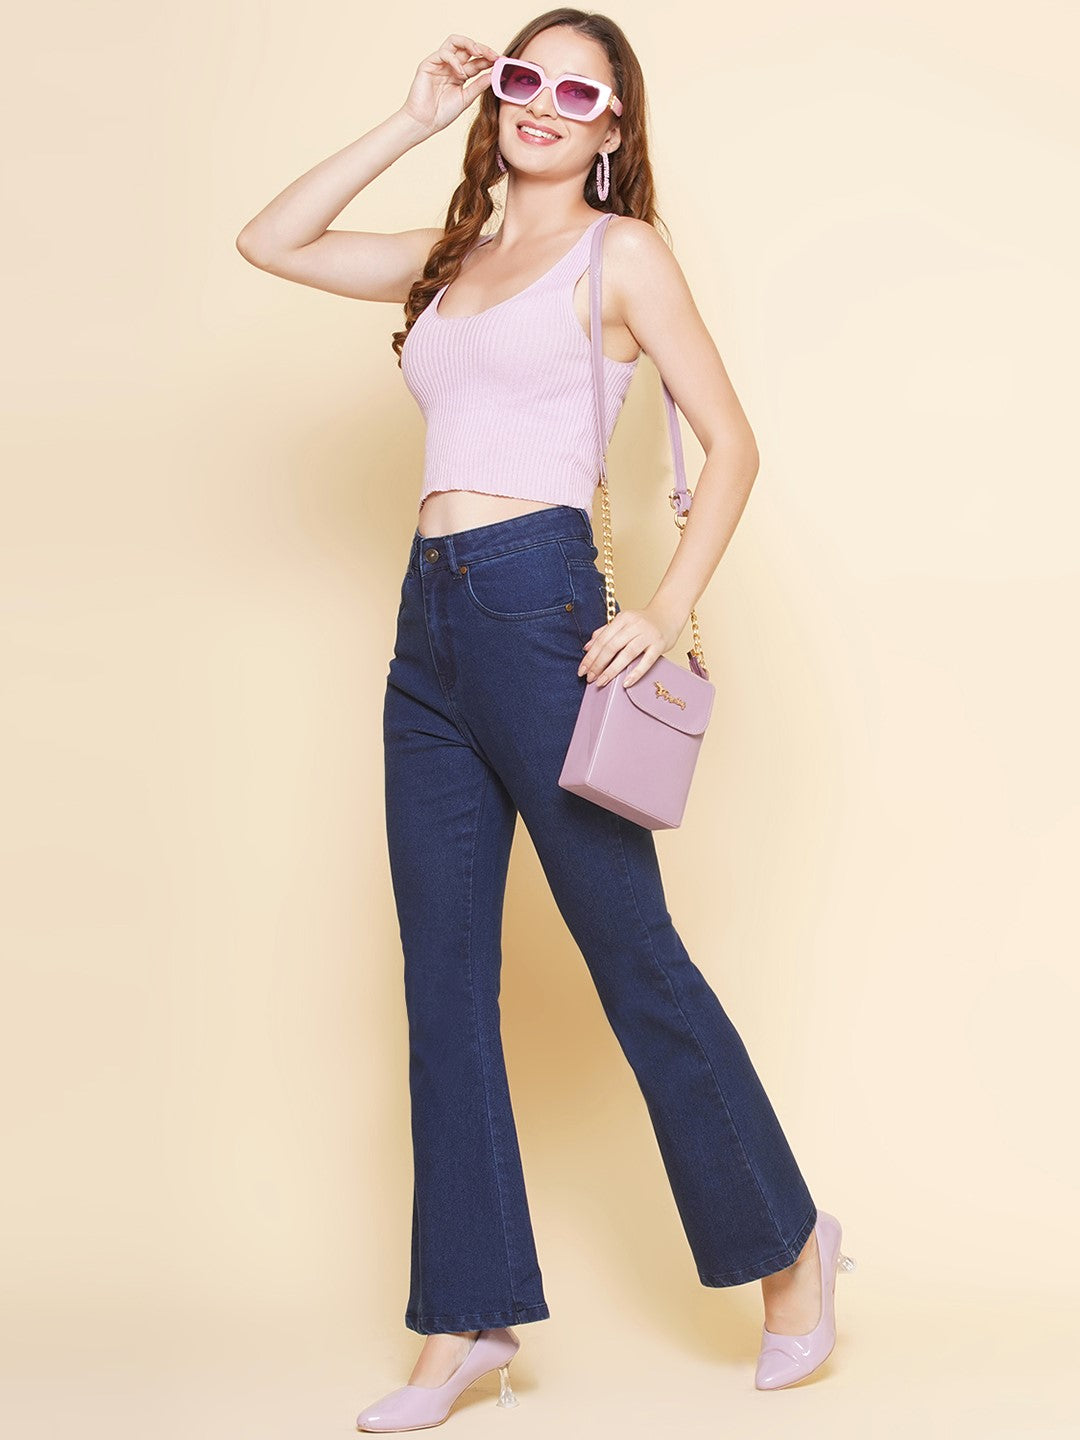 Boot Cut Blue High Rise Jeans For Women